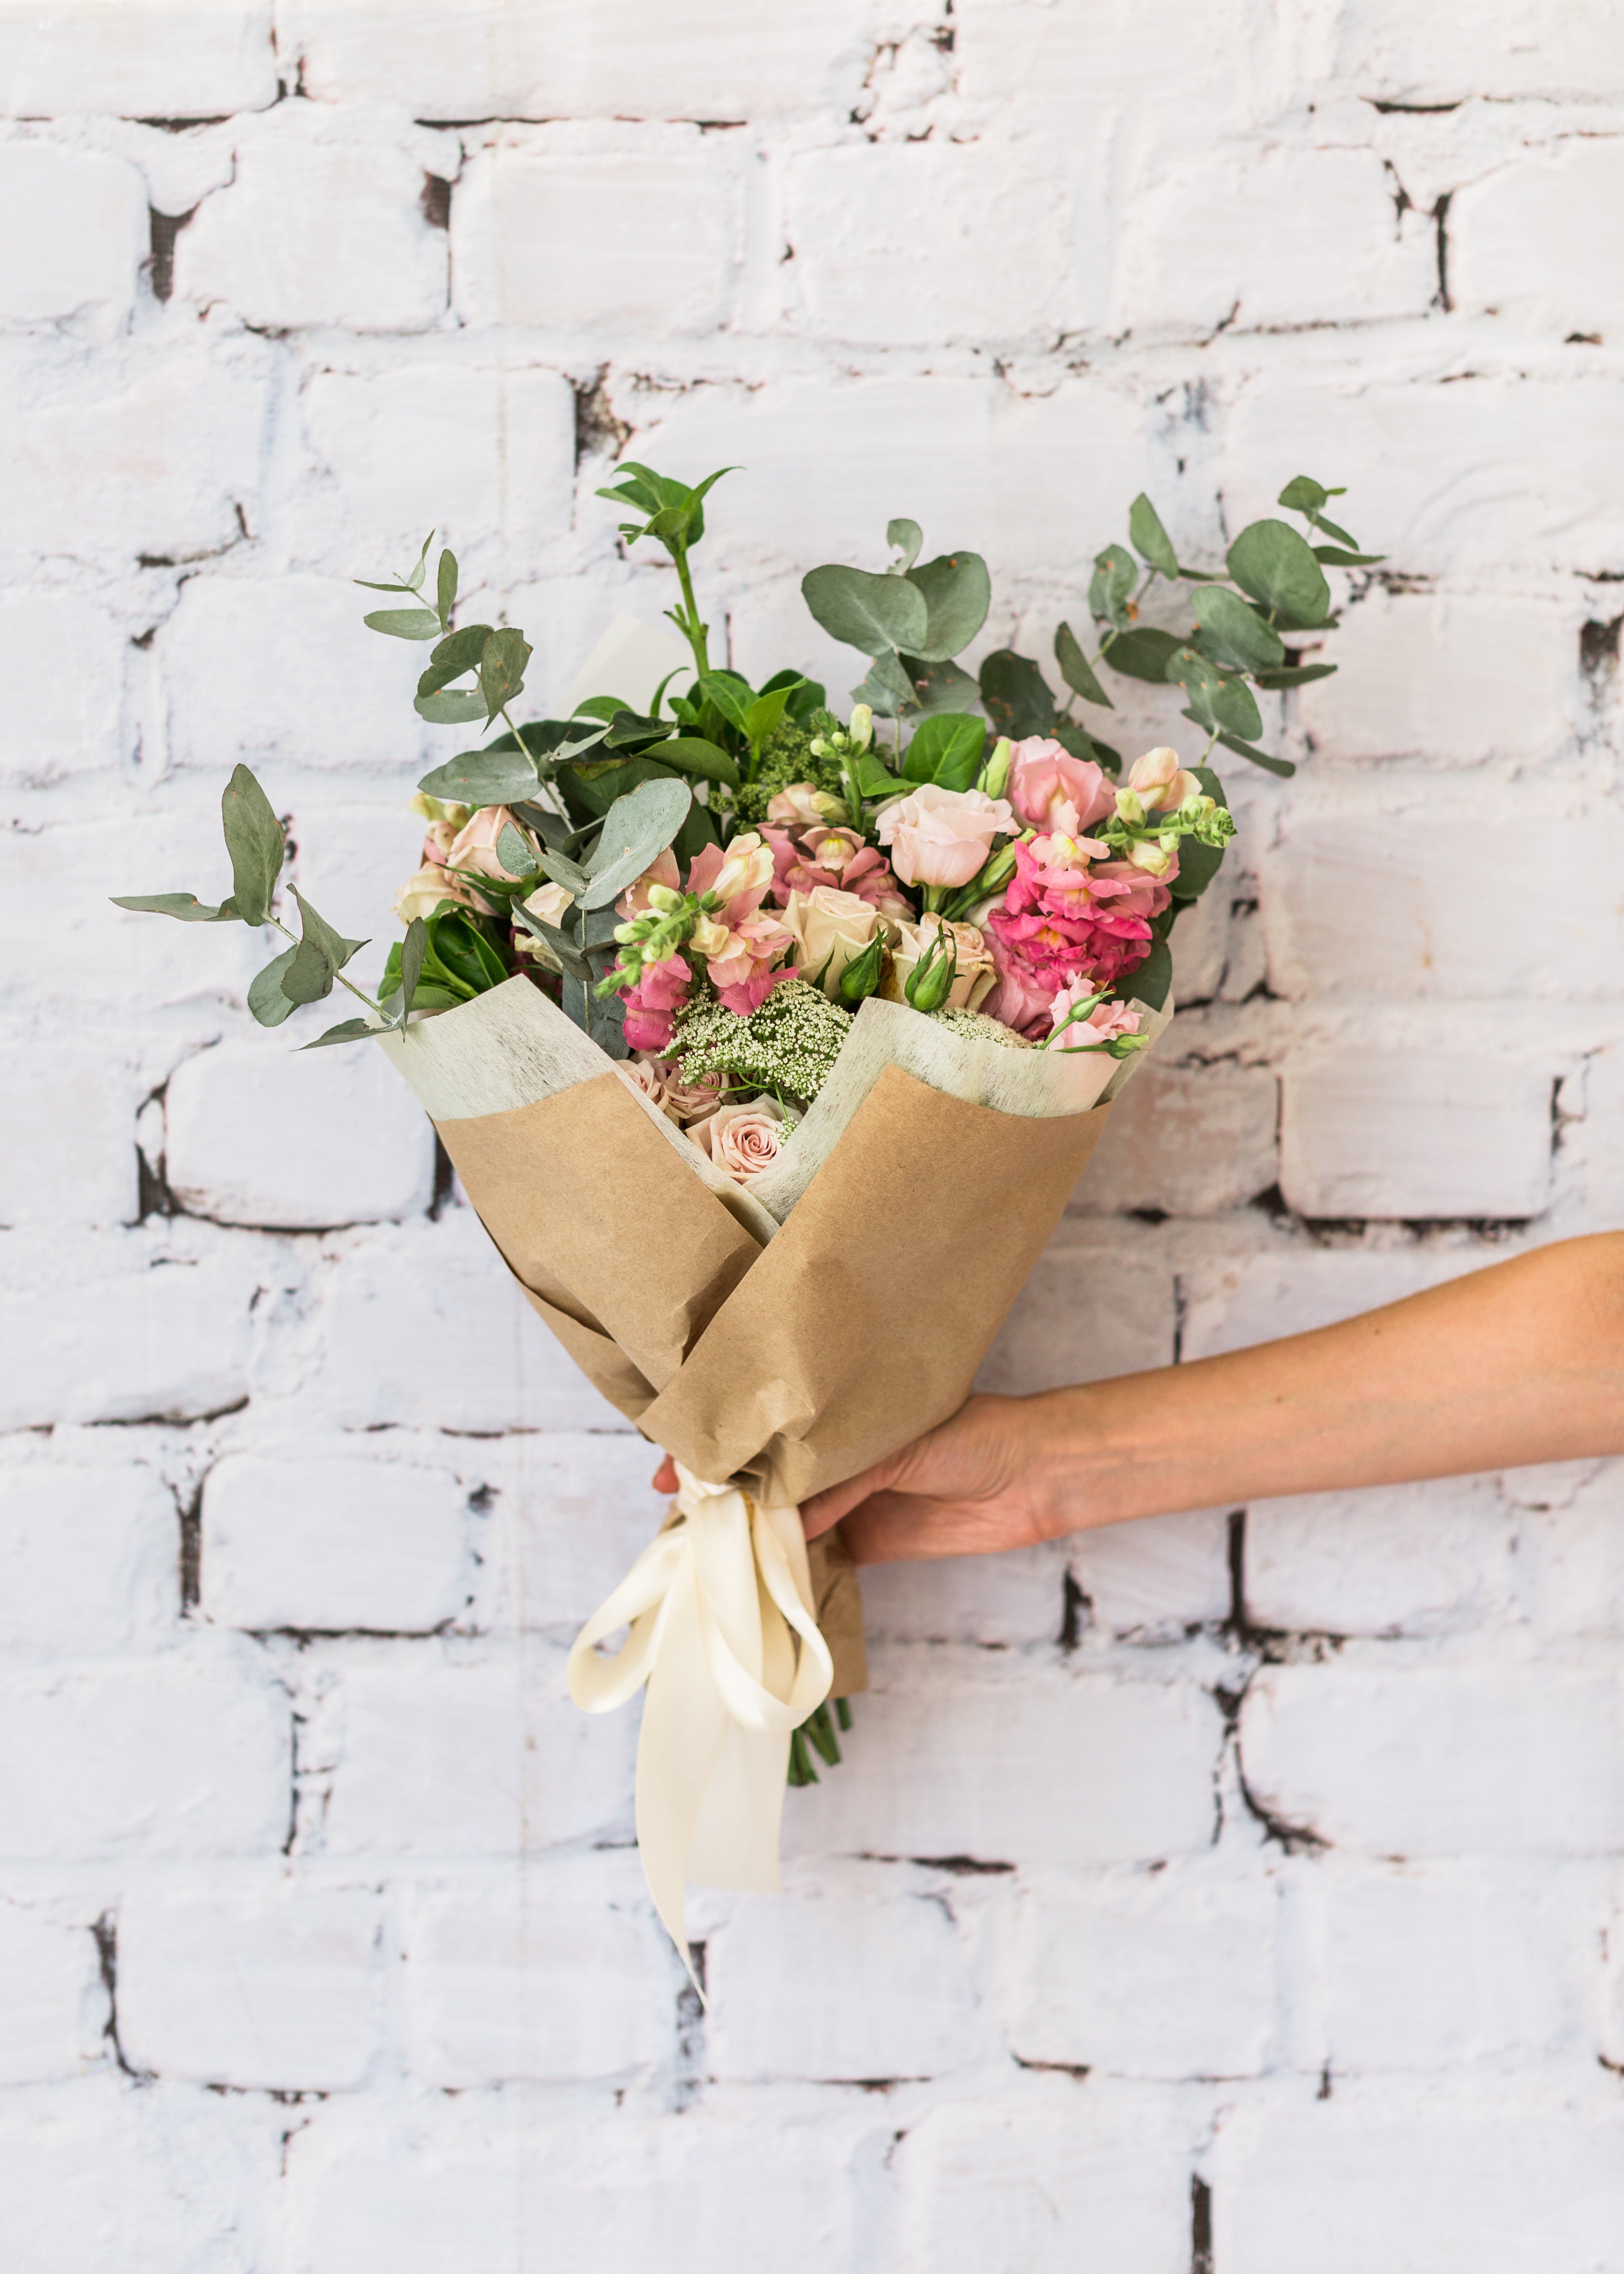 Canberra flower delivery - bunch of flowers with free delivery